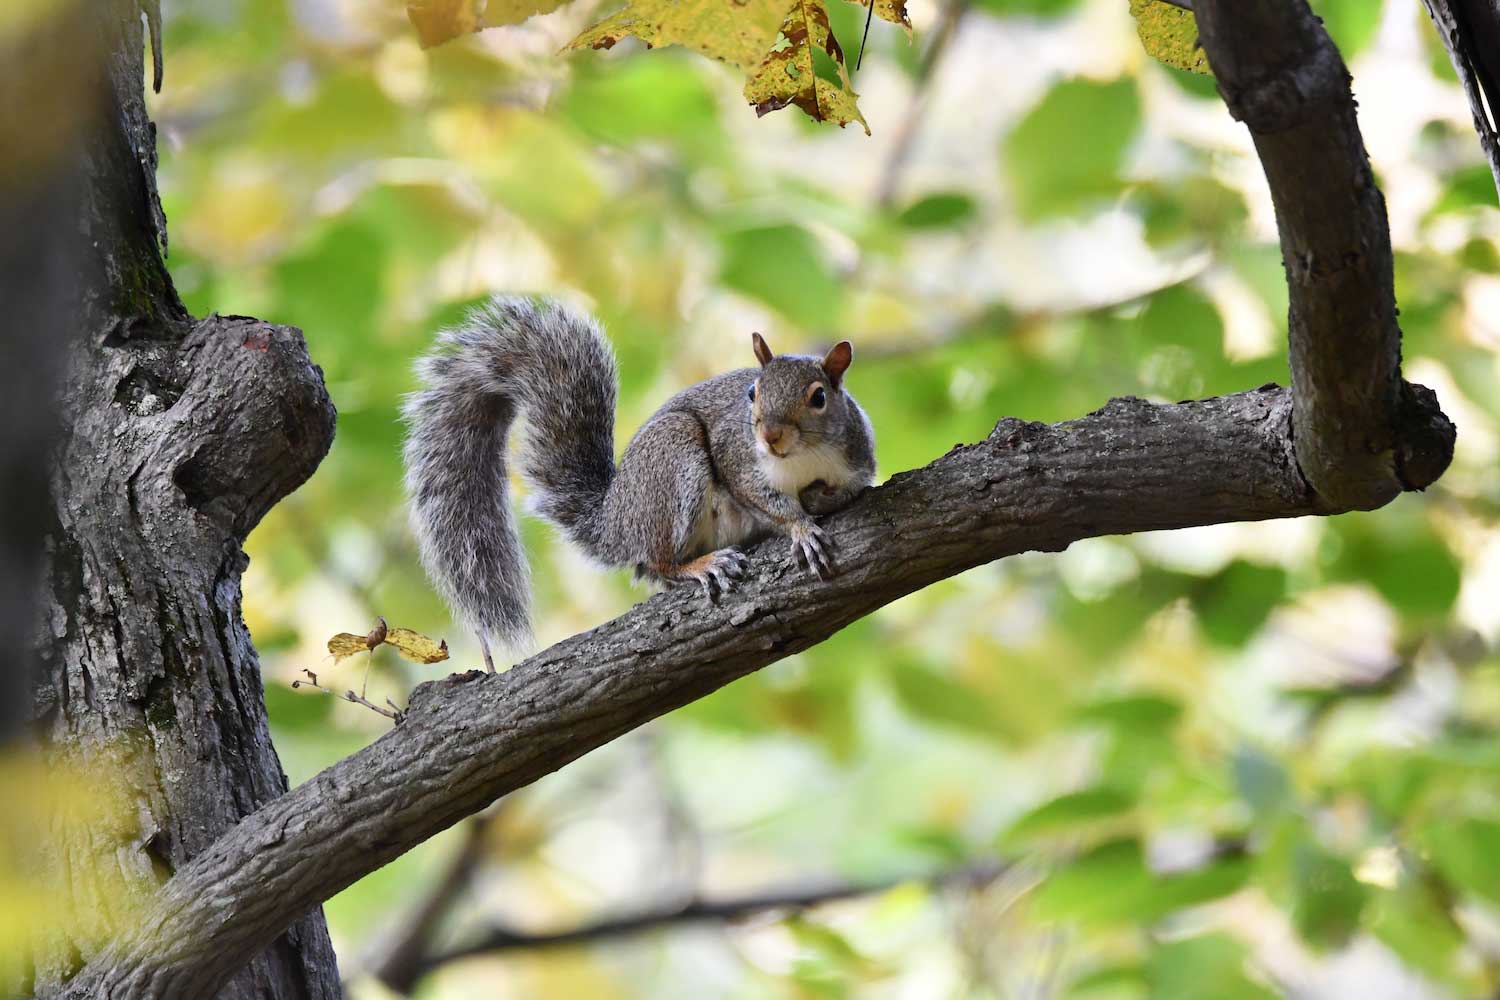 A squirrel on a tree branch.